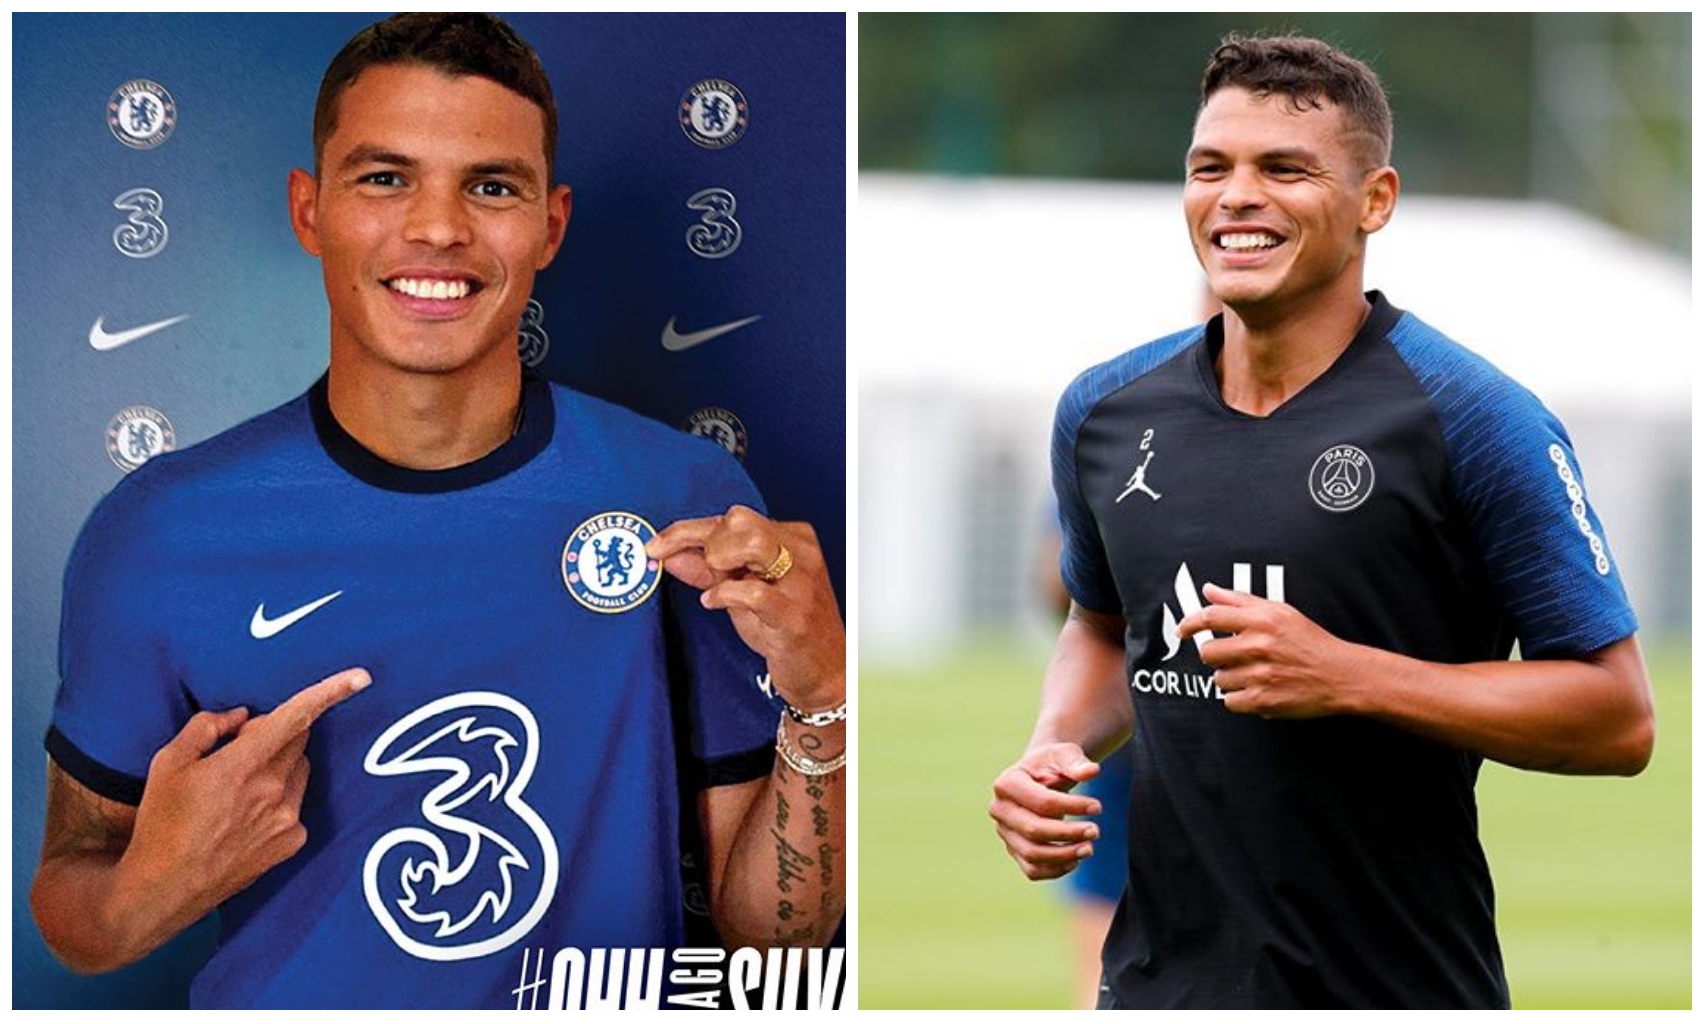 BREAKING: Chelsea confirms signing of Thiago Silva from PSG